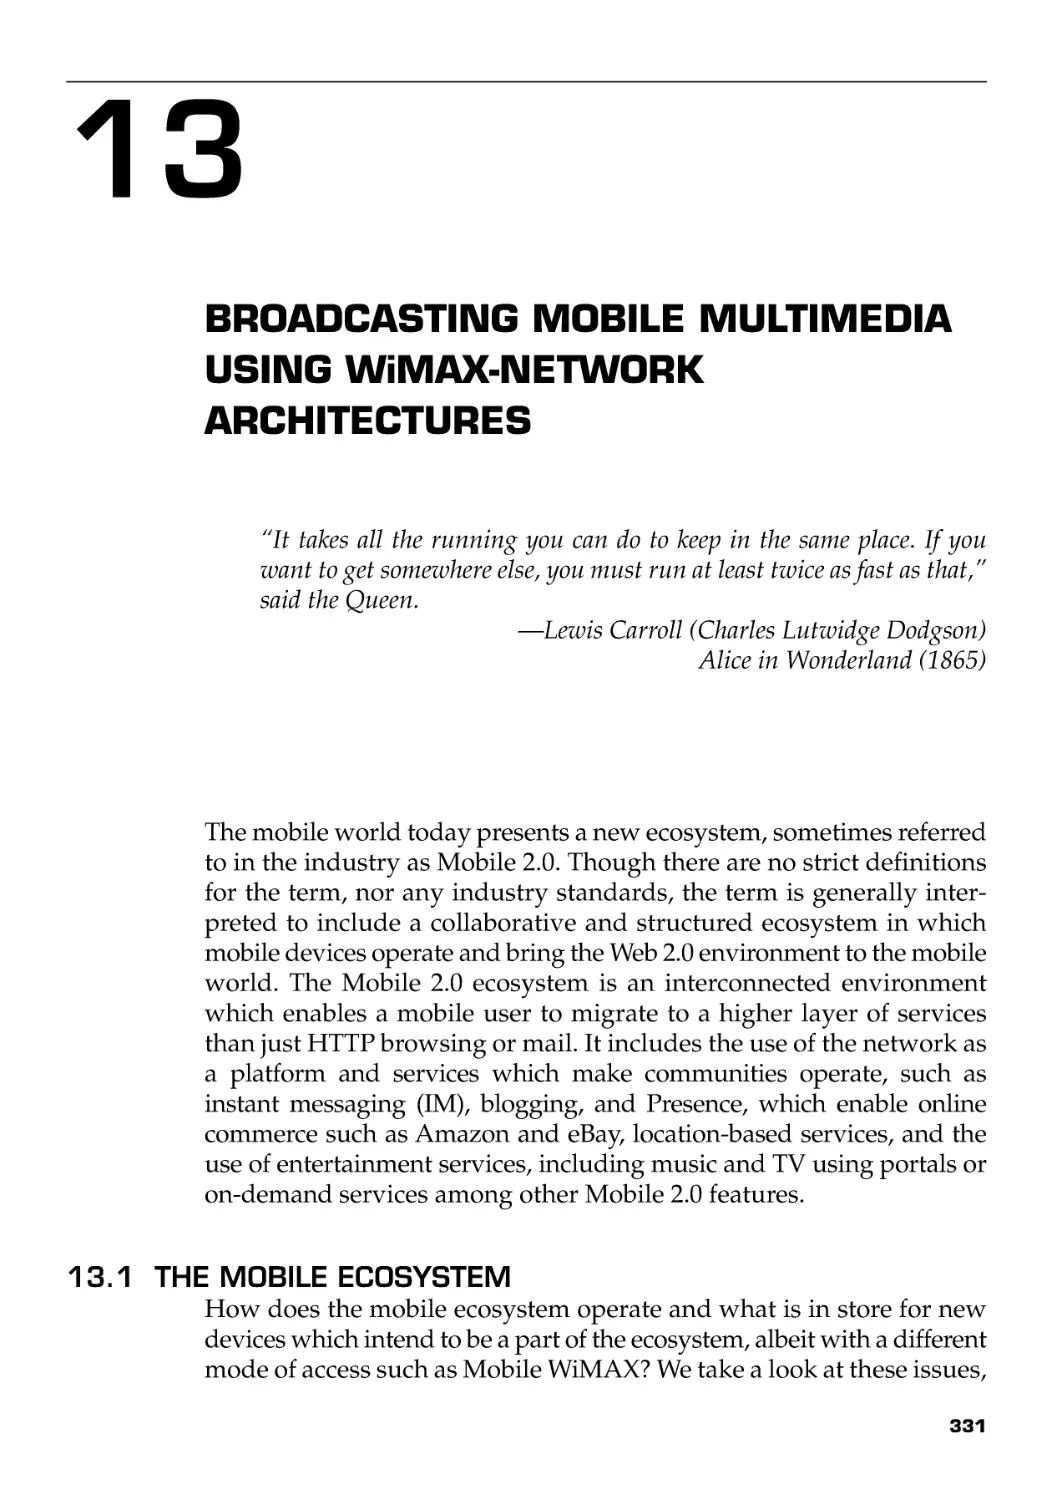 Chapter 13
13.1 The Mobile Ecosystem